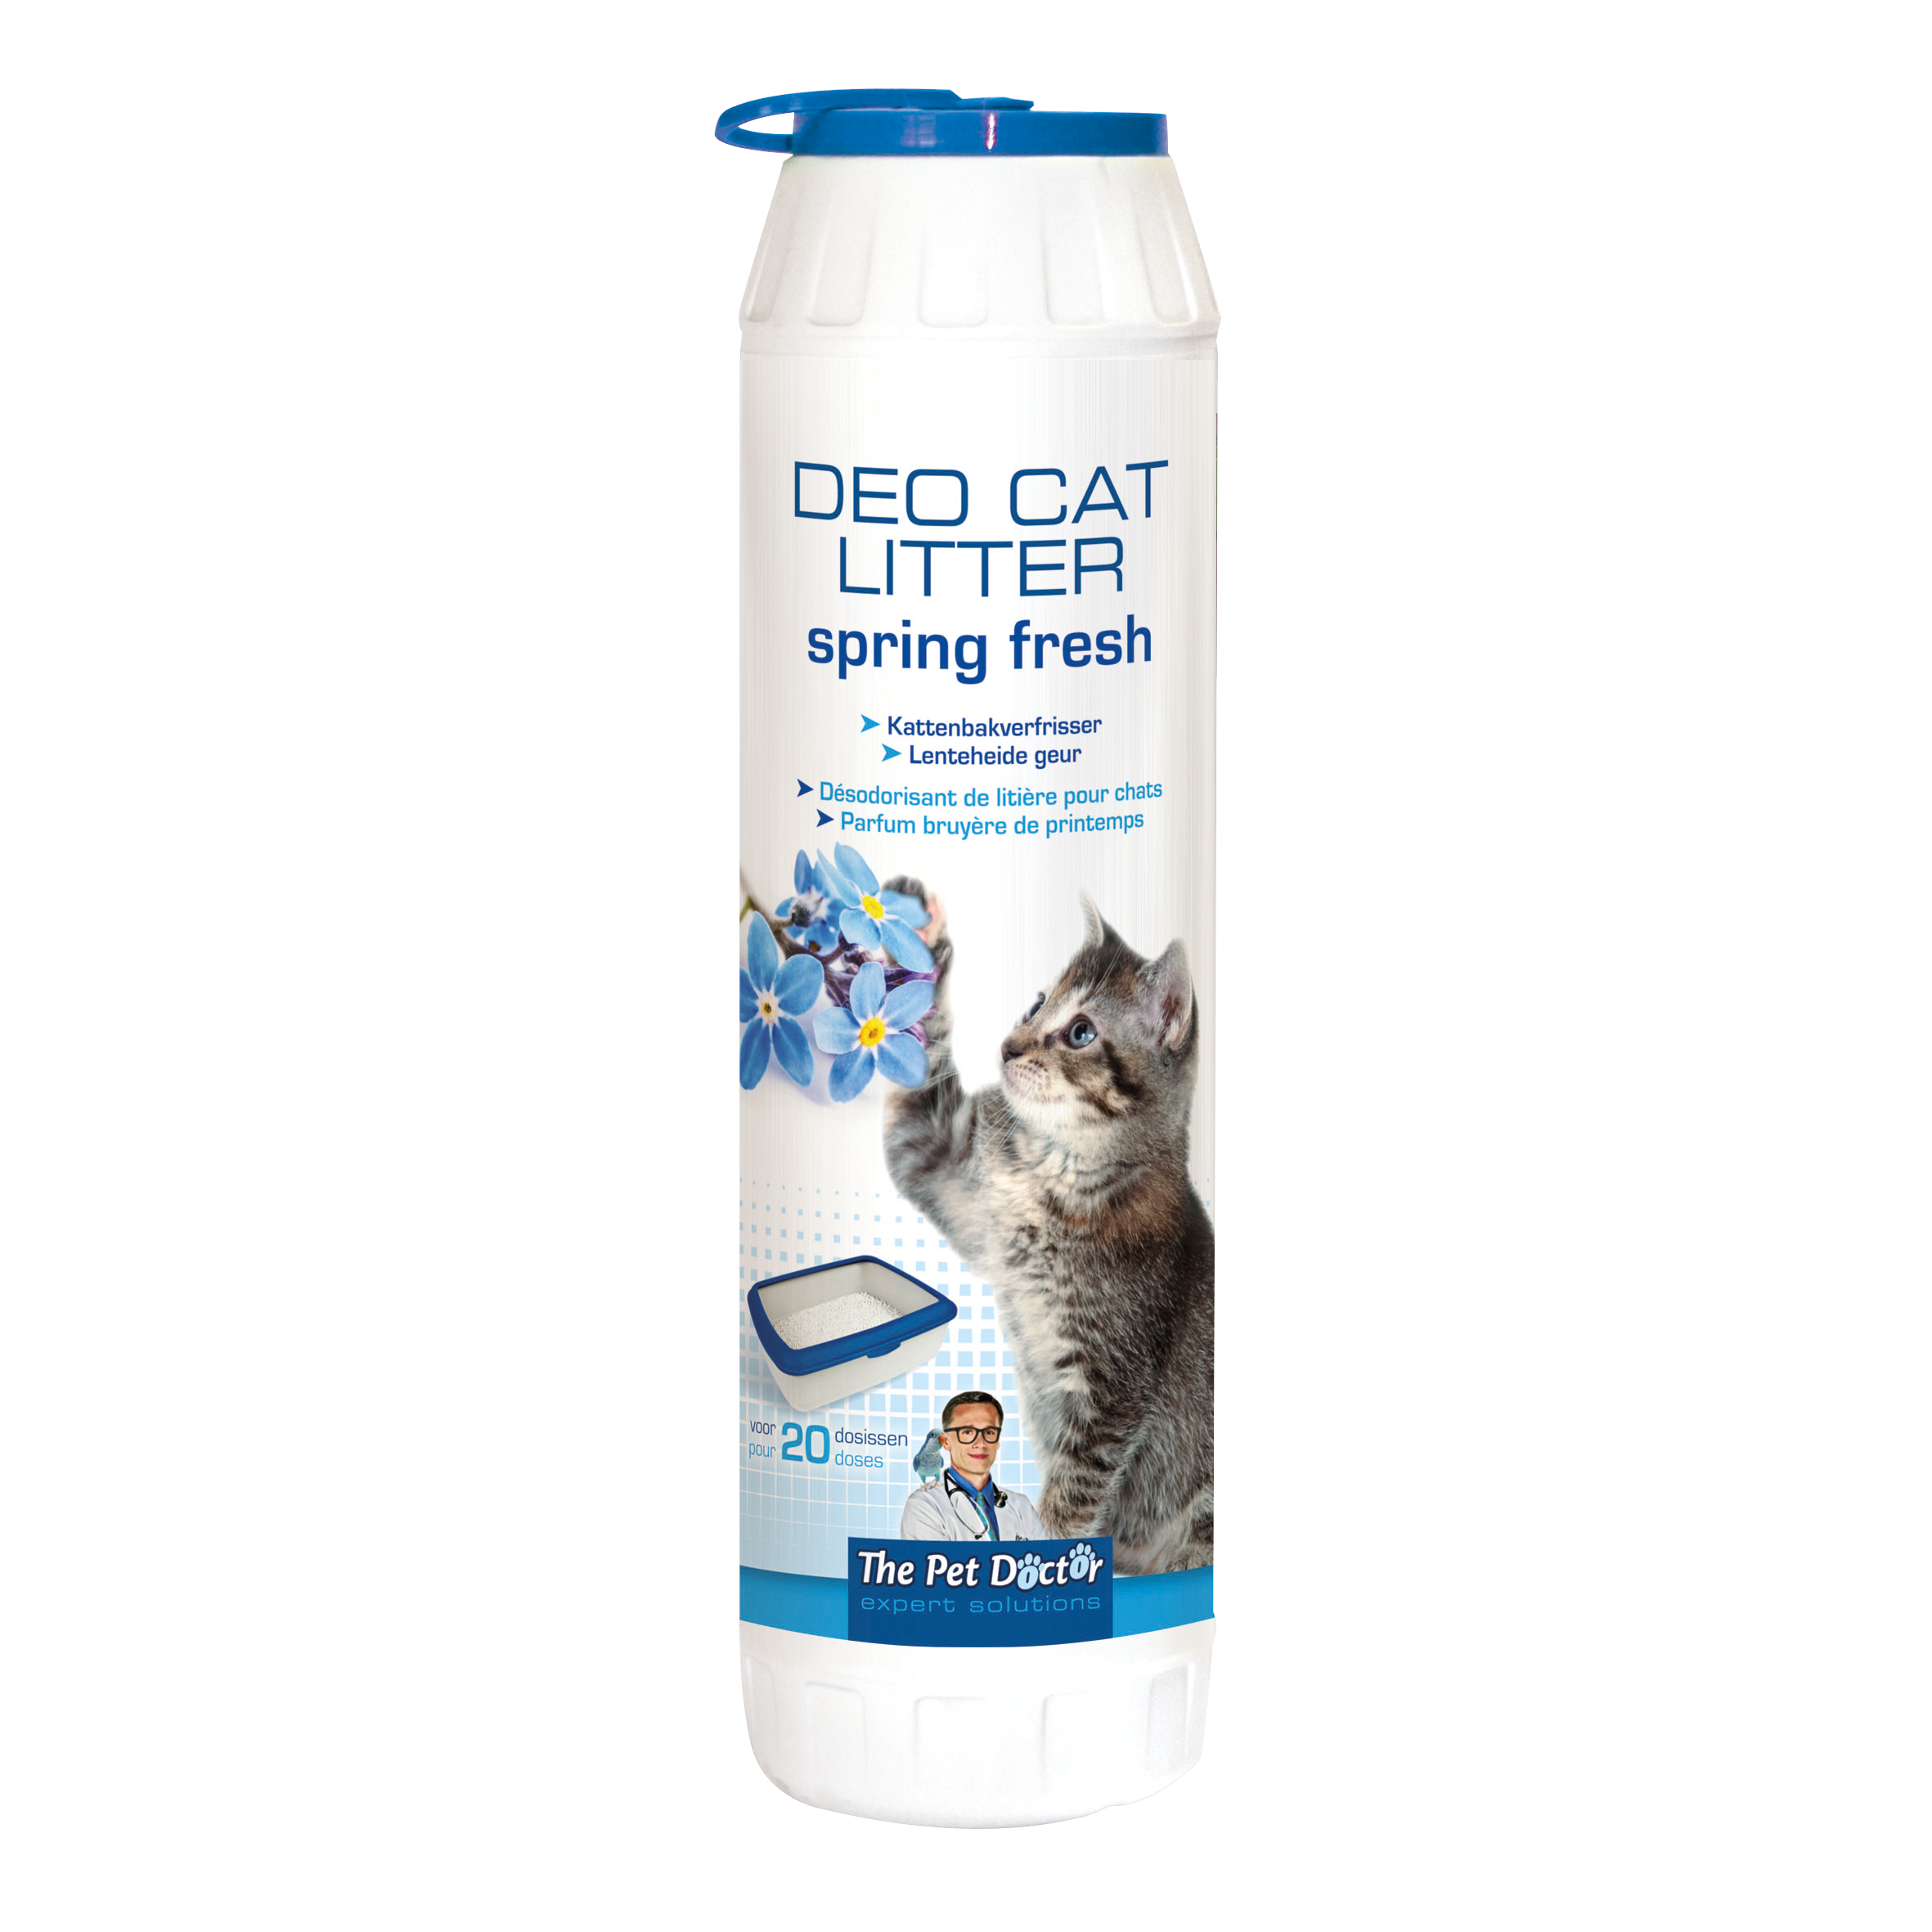 The Pet Doctor Deo Cat Litter Spring Fresh 750 g image